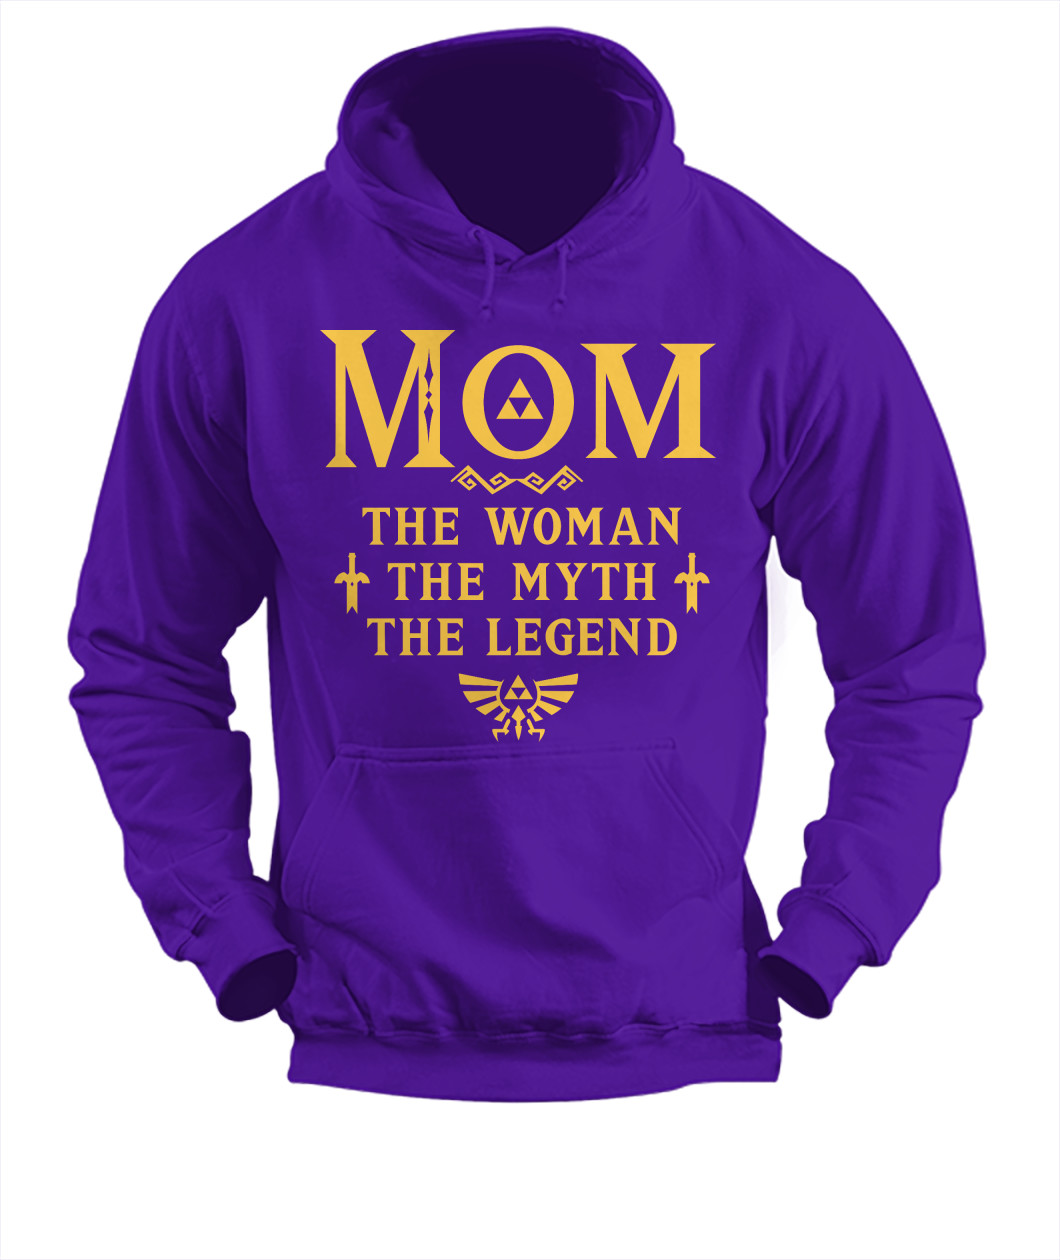 Celebrate the Ultimate Gamer Mom with the Mom The Woman The Myth The Legend Sweater purple